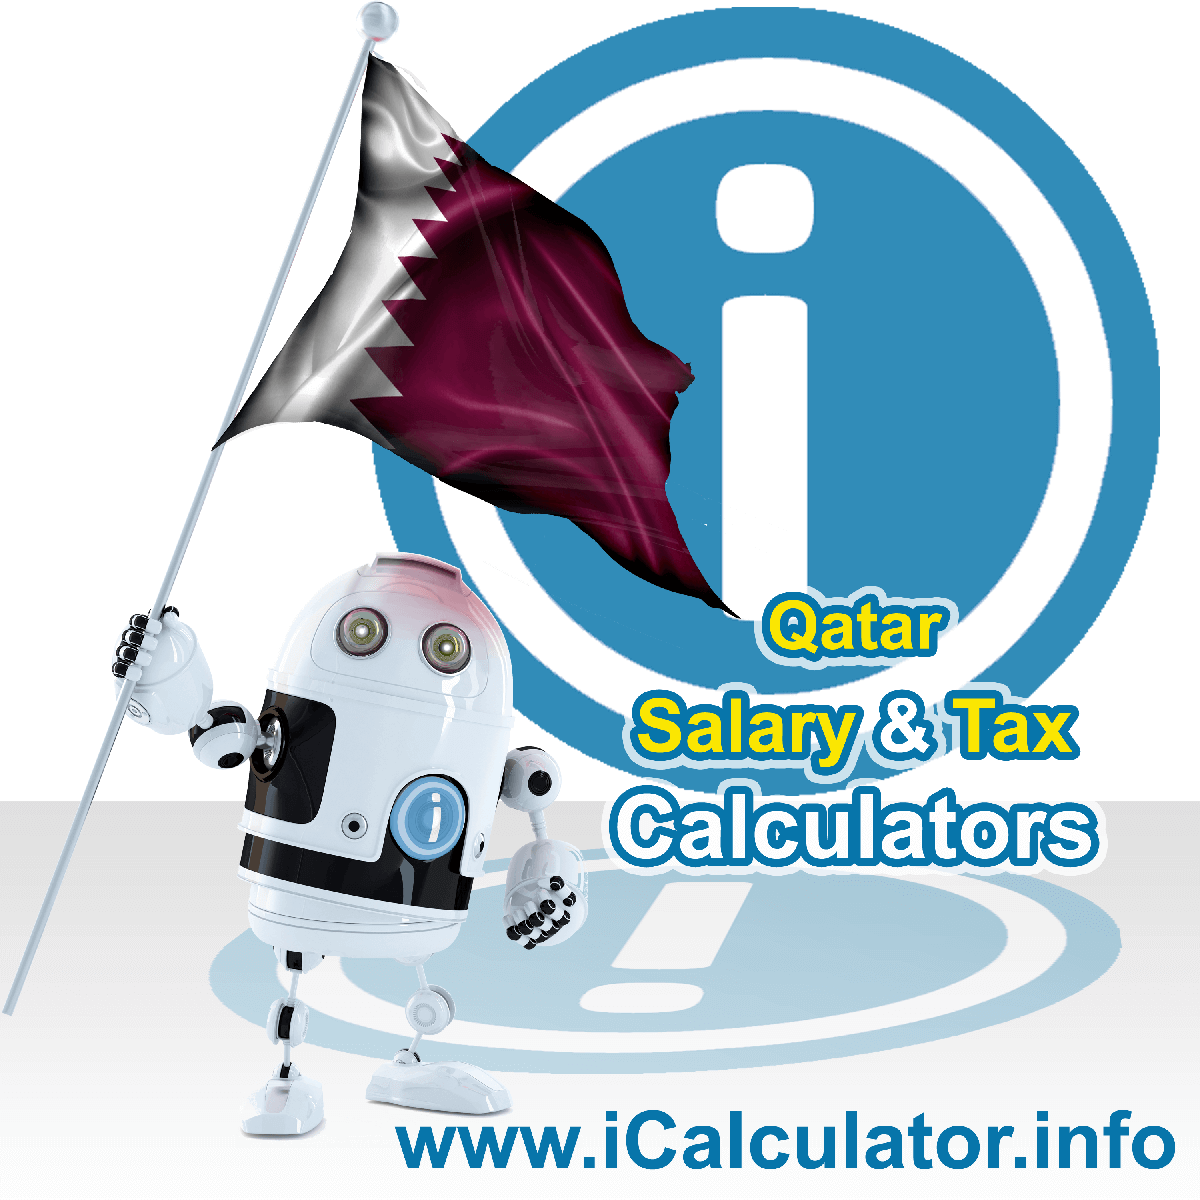 Qatar Wage Calculator. This image shows the Qatar flag and information relating to the tax formula for the Qatar Tax Calculator